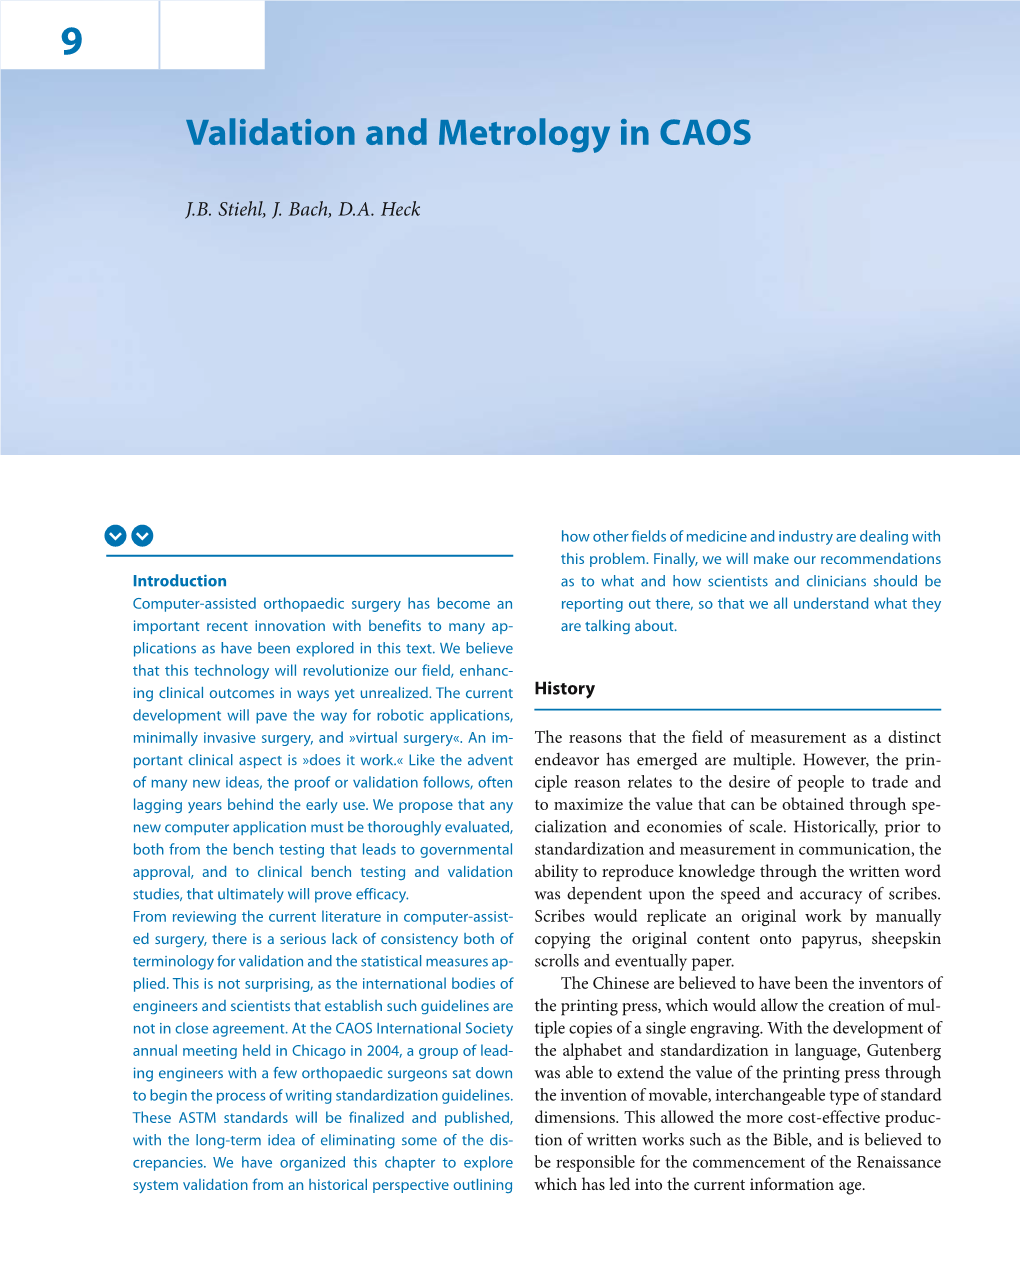 Validation and Metrology in CAOS